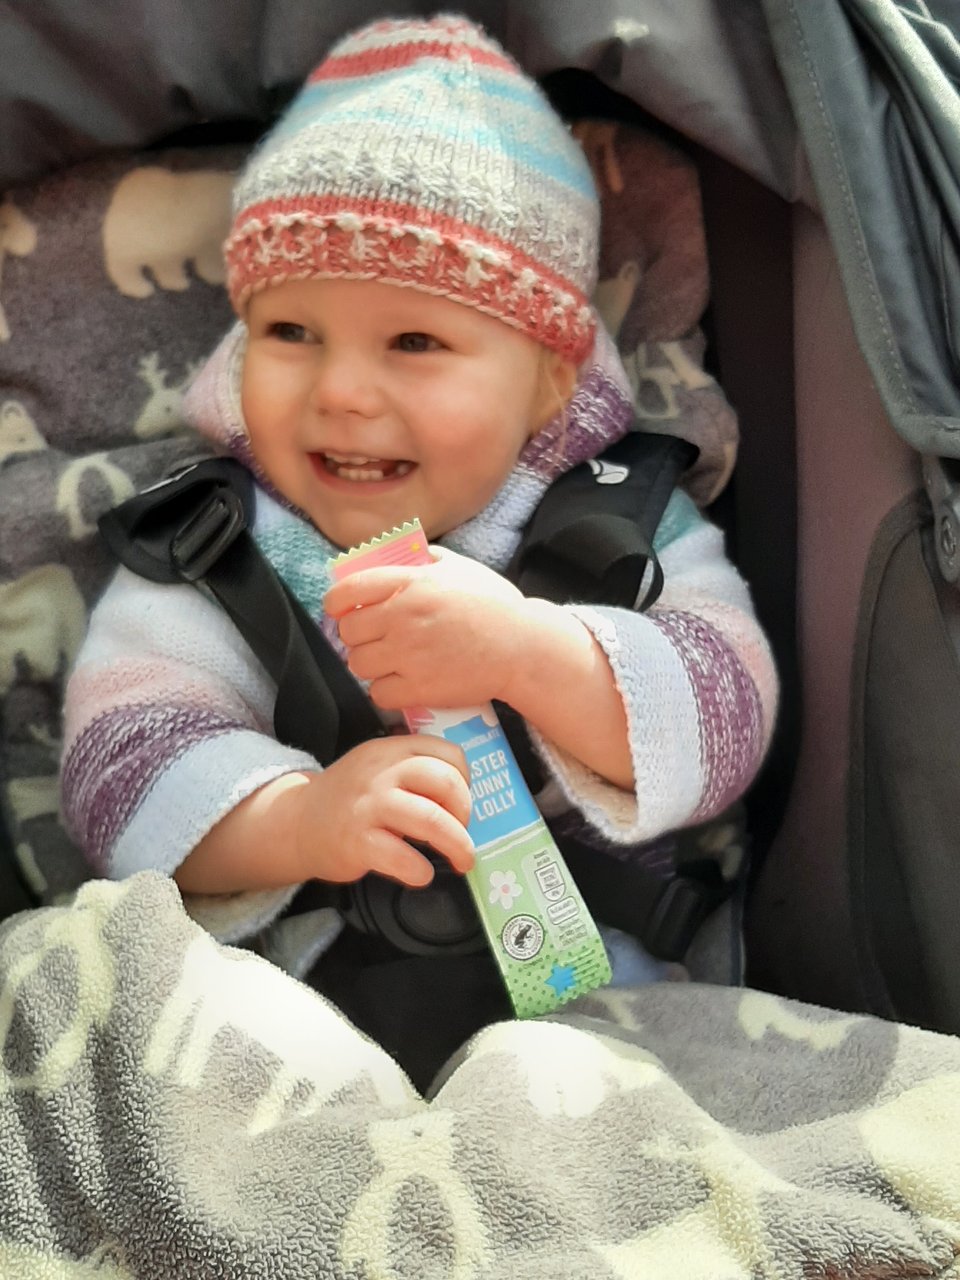 Baby smiling in its pram while holding a lolly.